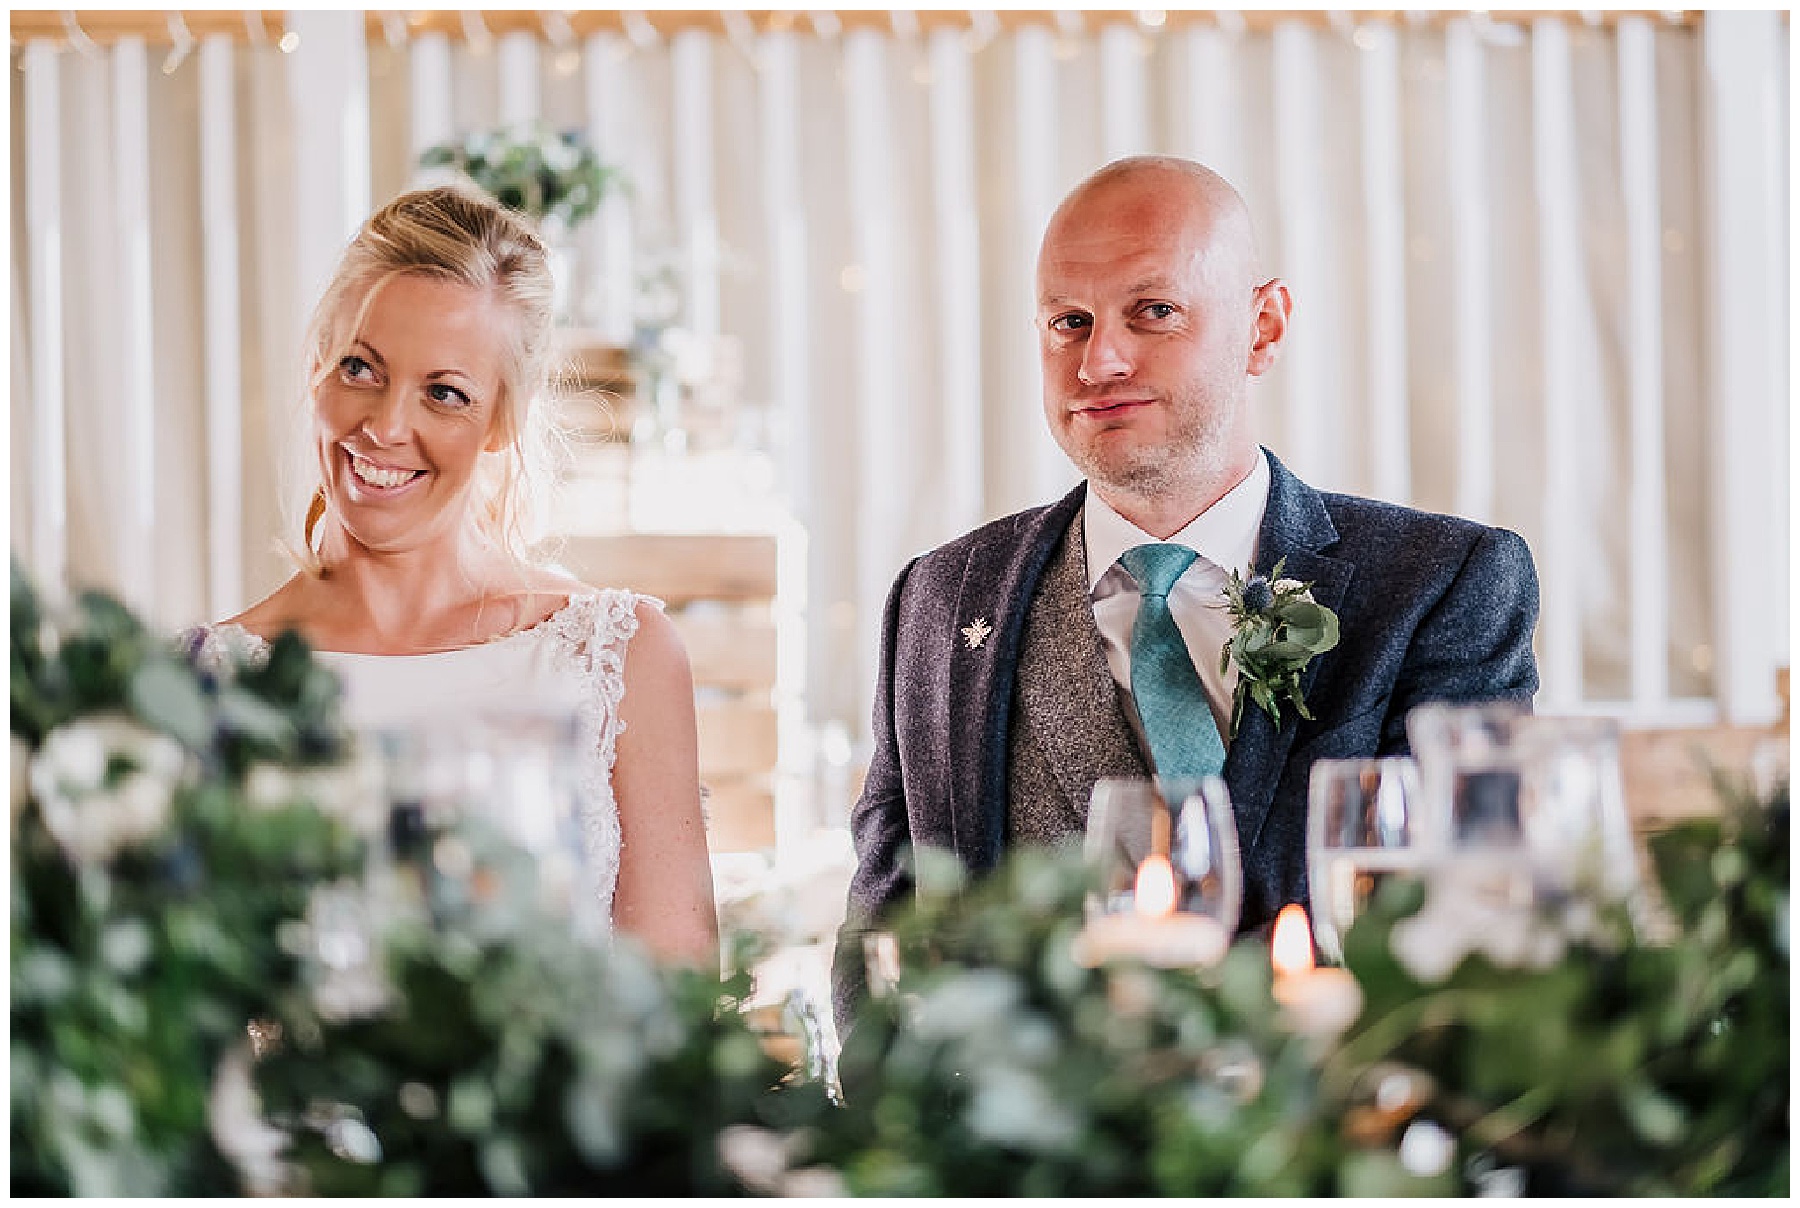 Lauren + Rob’s at Askham Hall (30 guests and totally fabulous!)